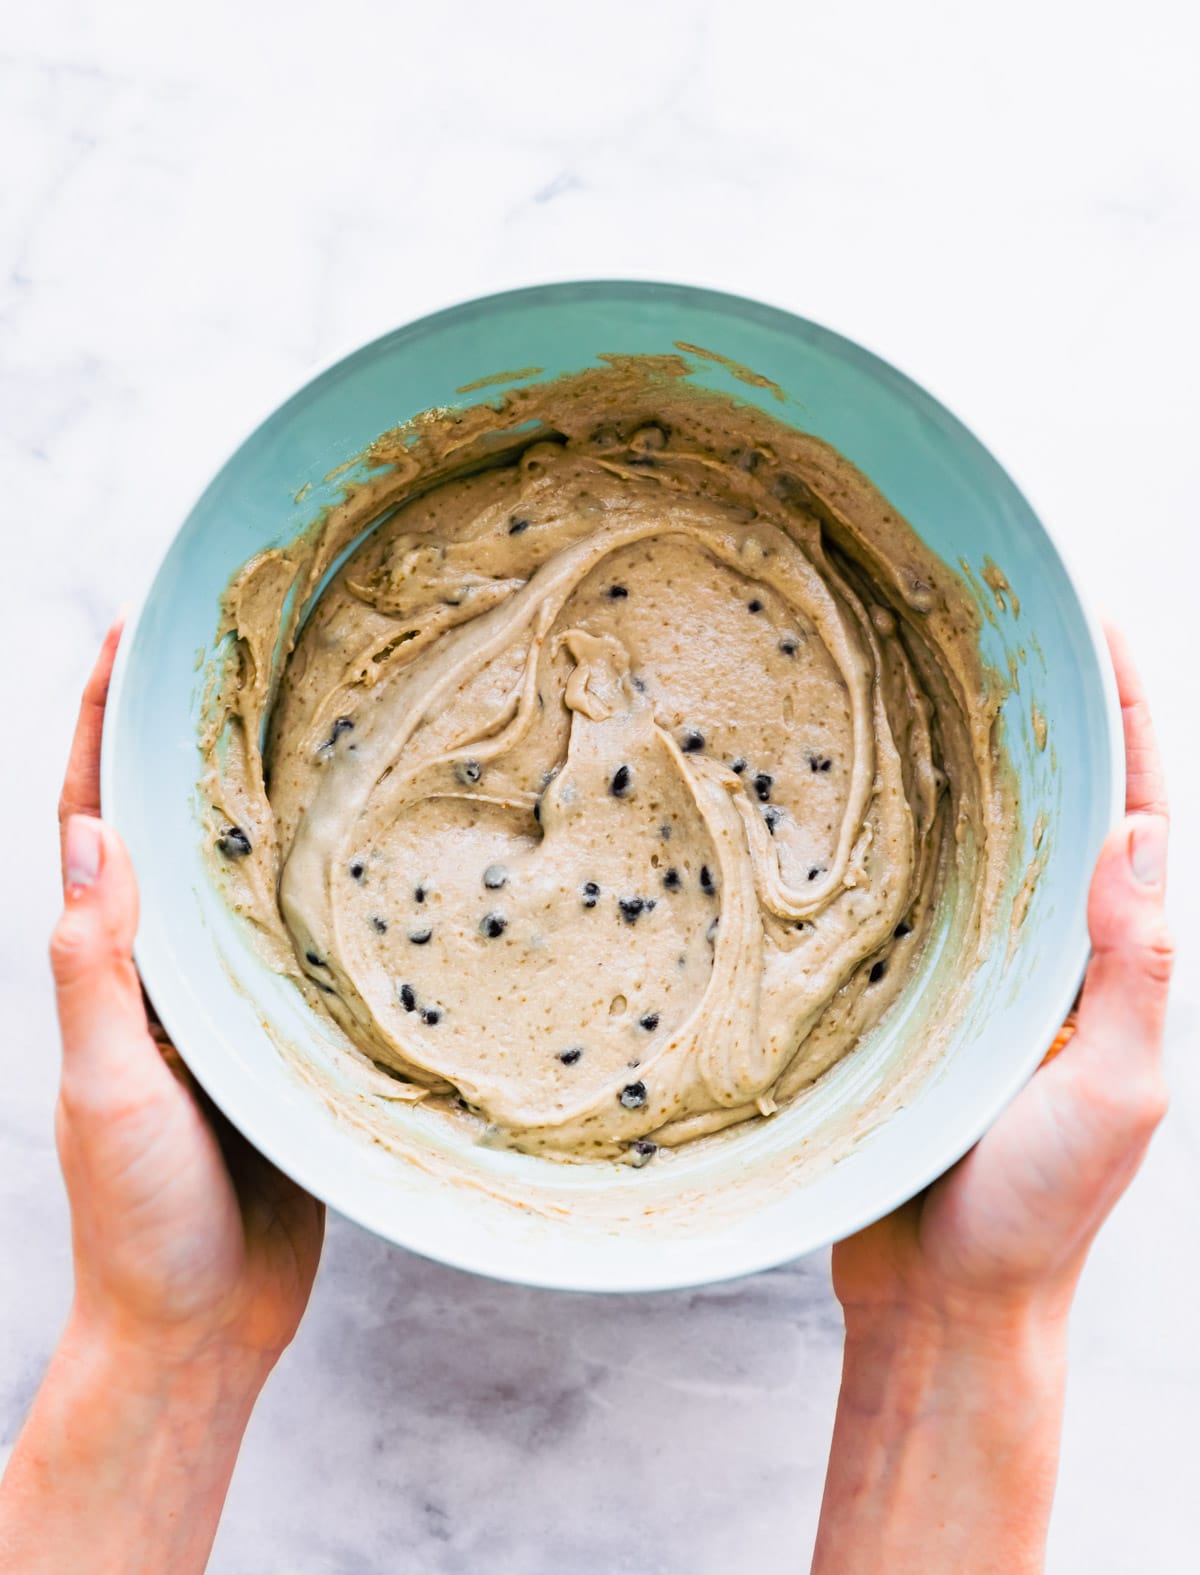 Two hands holding blue bowl filled with banana bread batter with mini chocolate chips mixed into batter